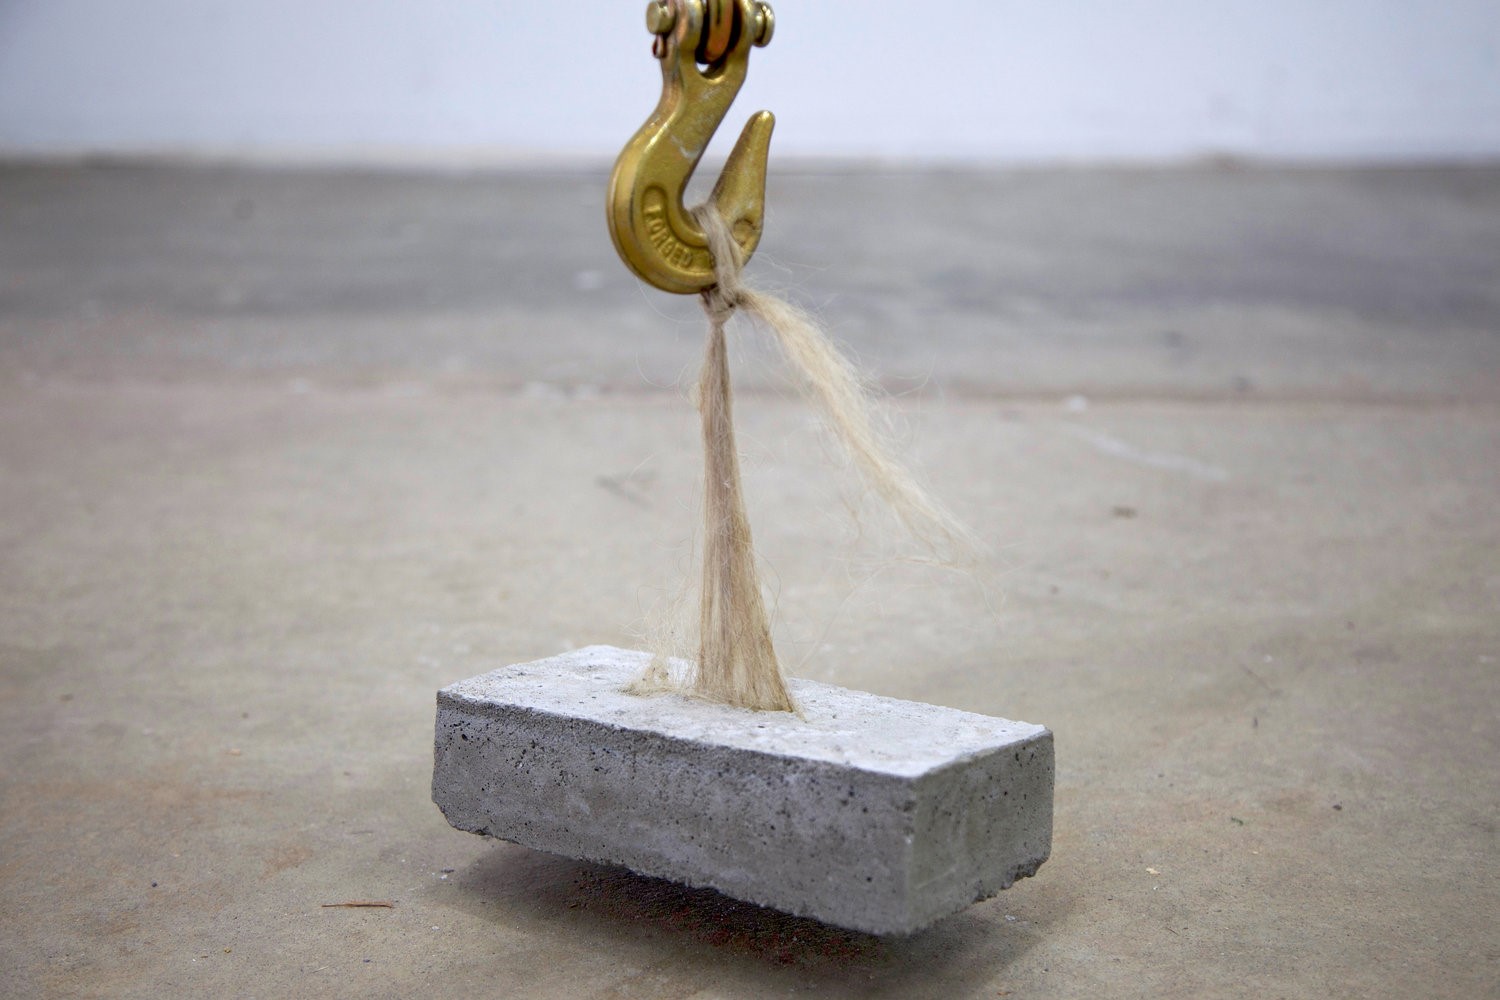 A gold colored hook holds up a cement block by an attached bunch of blonde hair